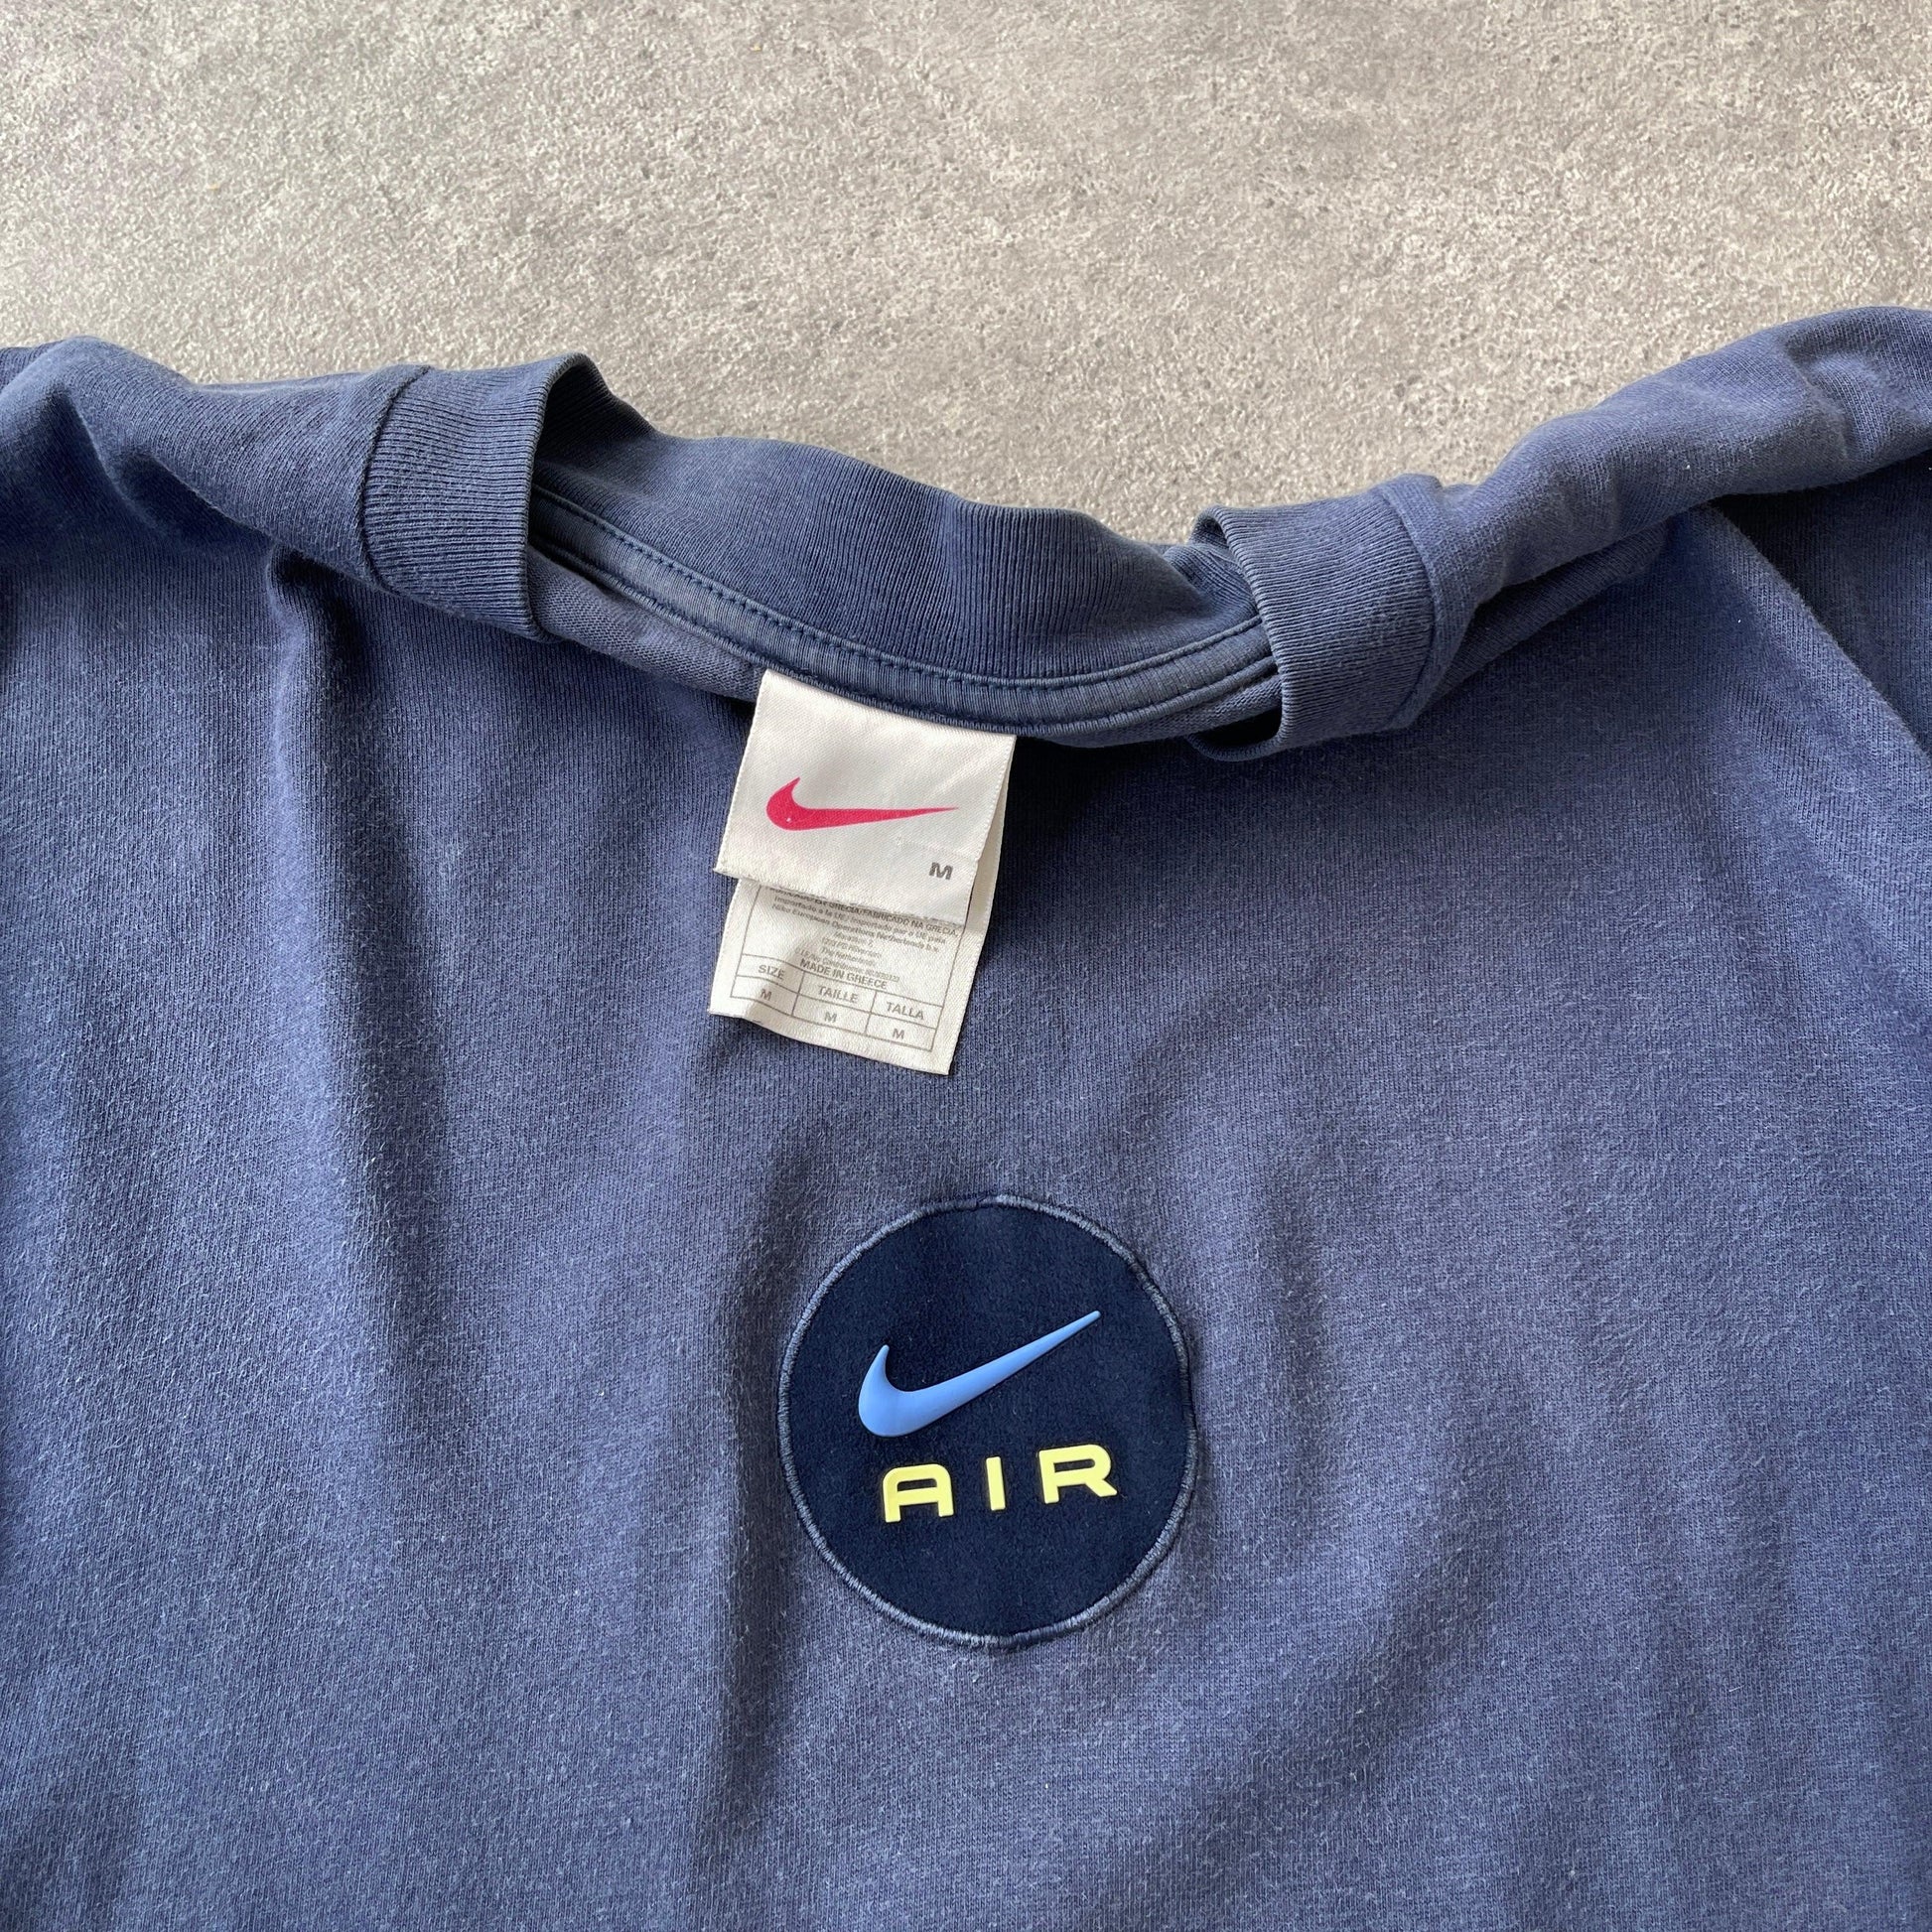 Nike Air 1990s heavyweight embroidered t-shirt (M) - Known Source